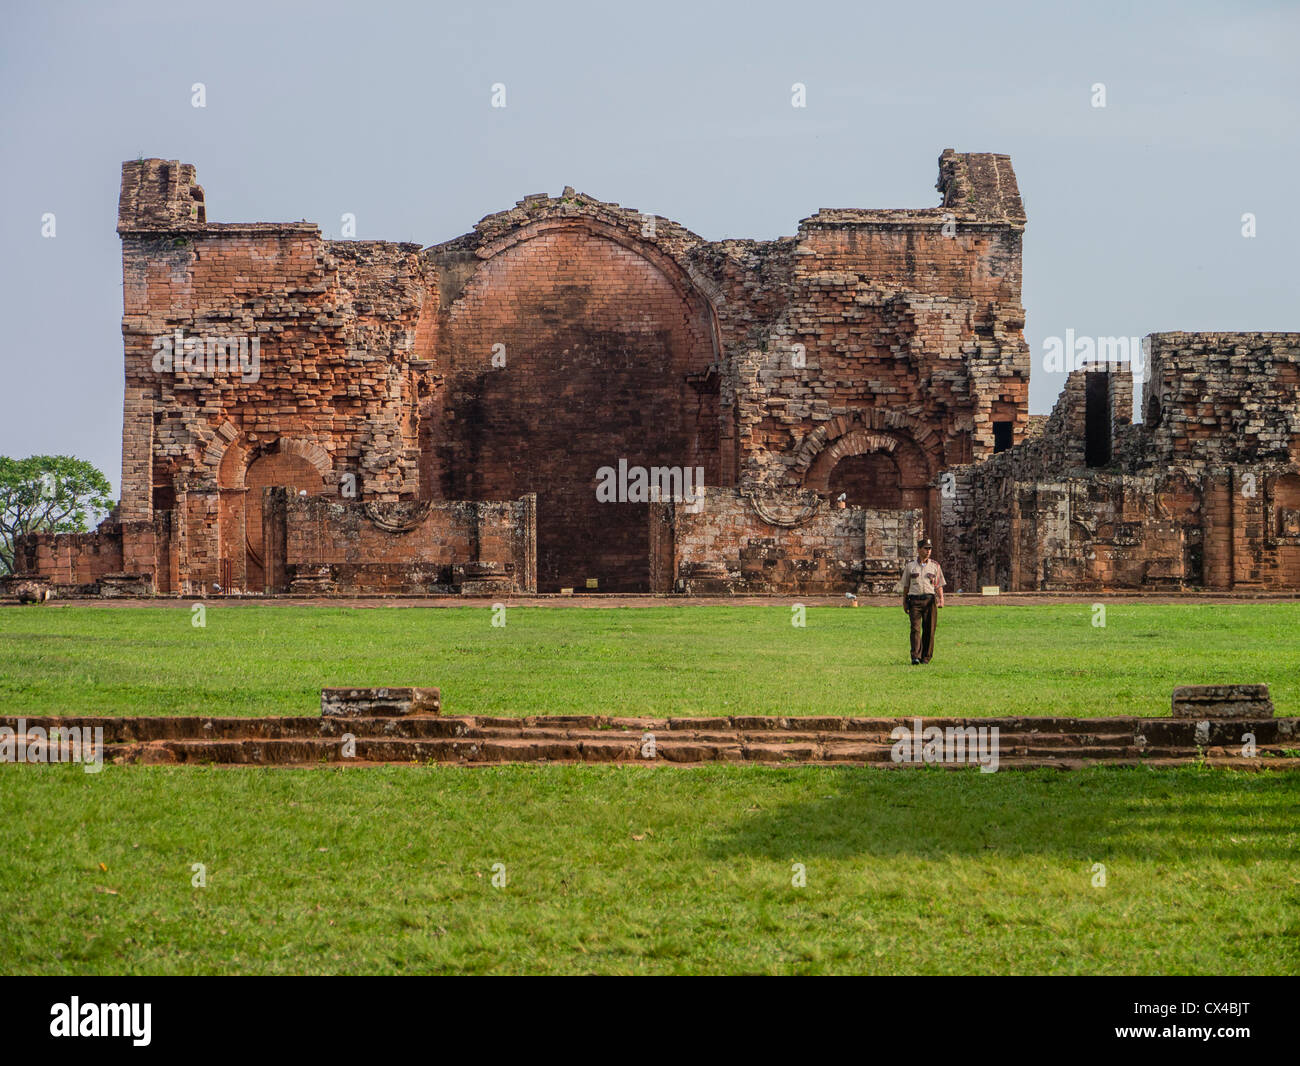 A guard stands in the main plaza in front of the ruins of the famous Jesuit reduction located at  Trinidad, Paraguay. Stock Photo